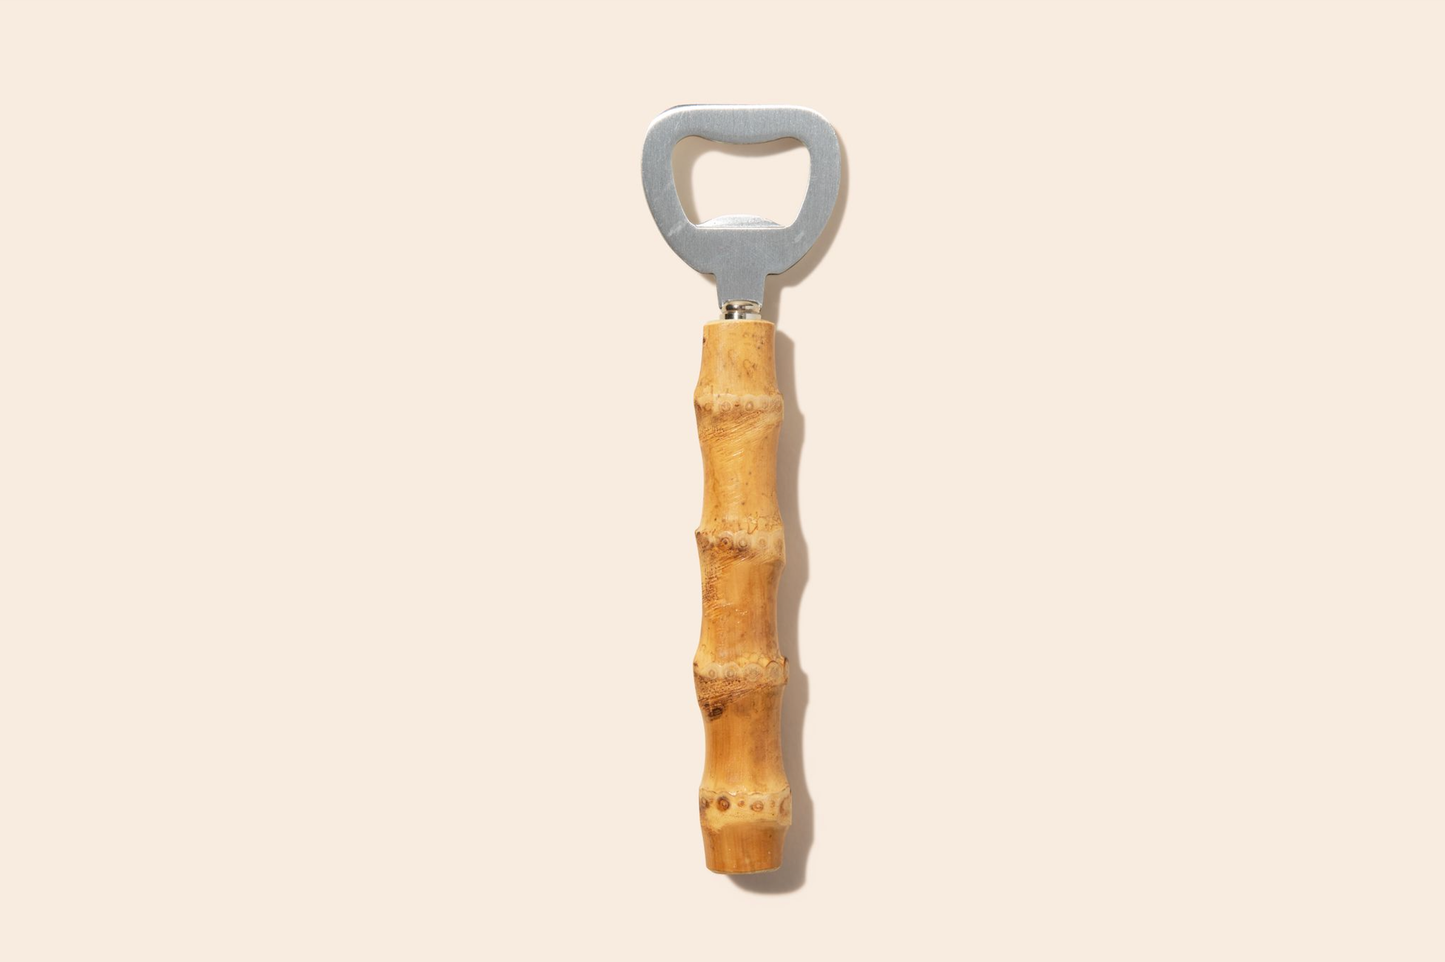 Bamboo Switch - Bamboo Root Bottle Opener | New Bestseller Bamboo Switch